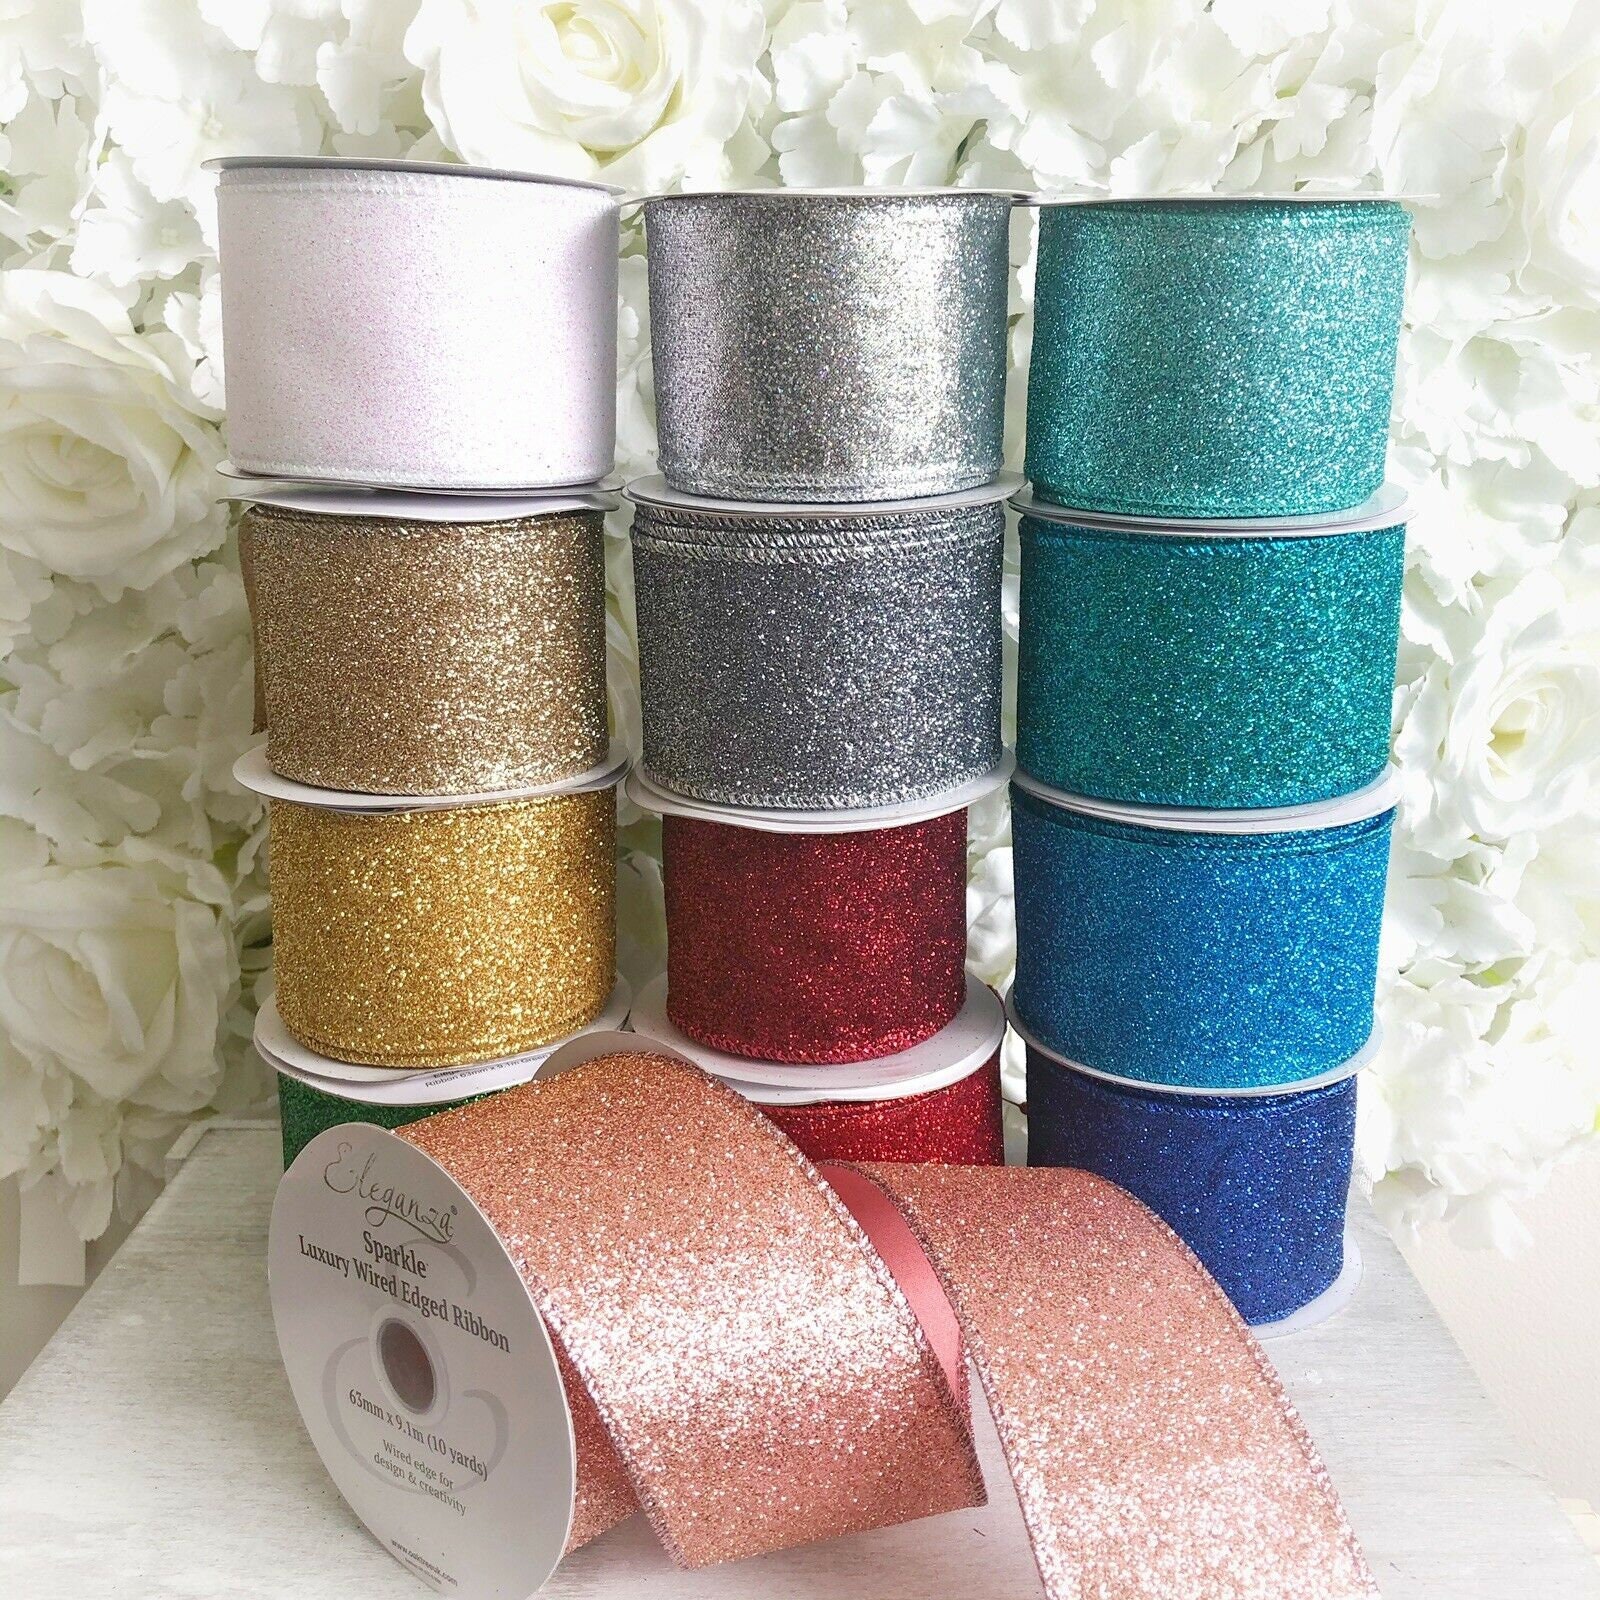 1.5 X 10Yds Wired Satin Frosted Glitter Ribbon White